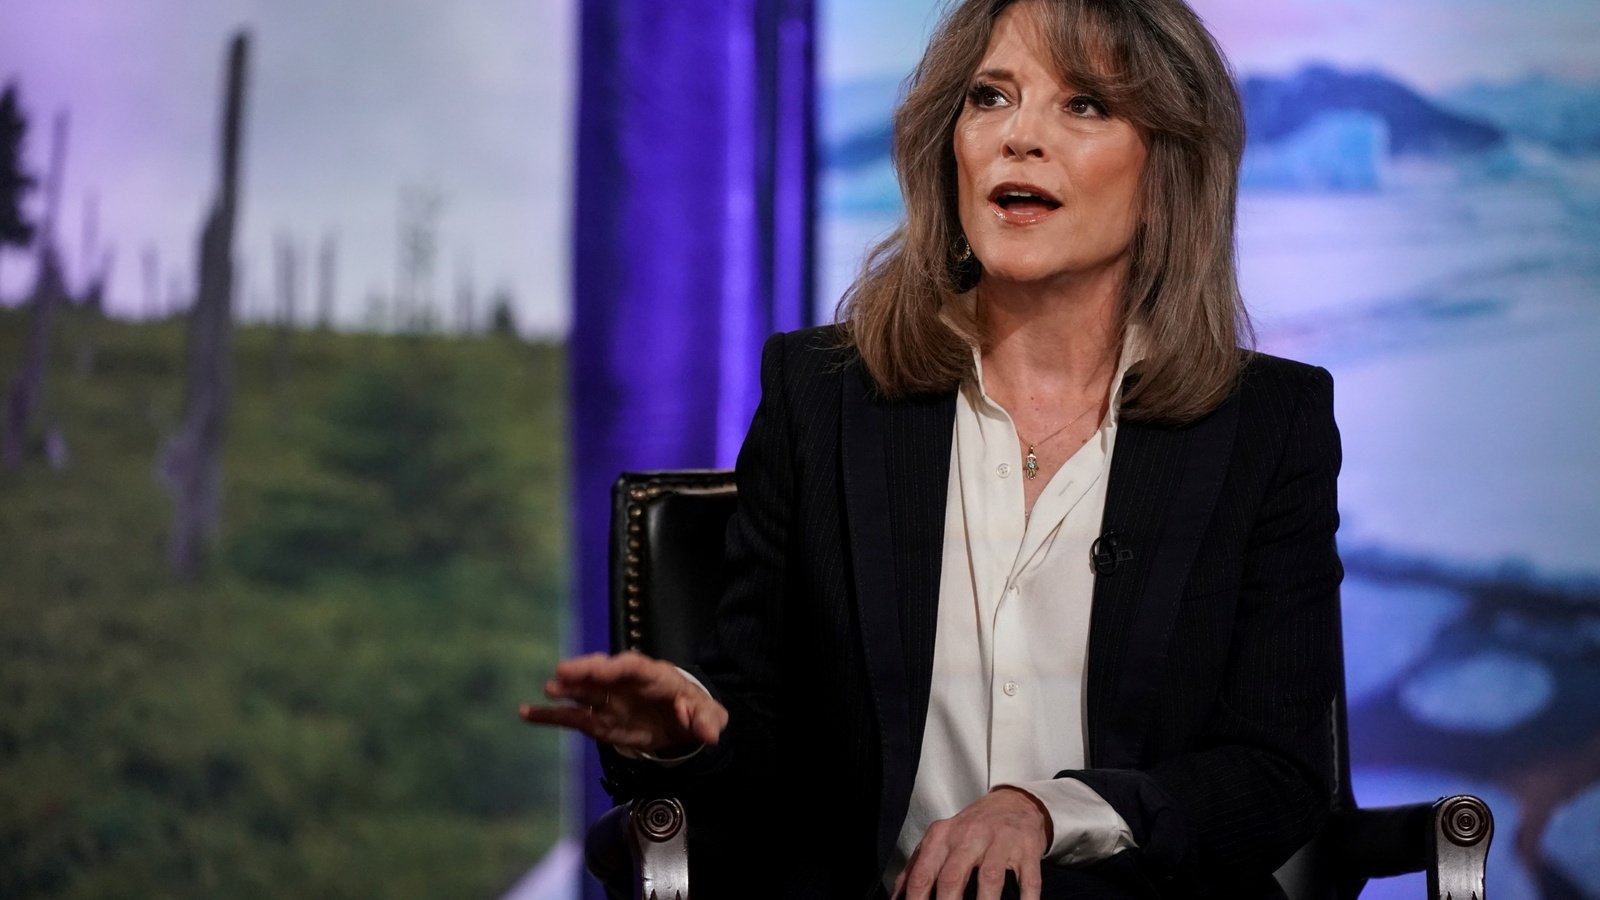 Meet Marianne Williamson, Democratic Presidential Candidate Council